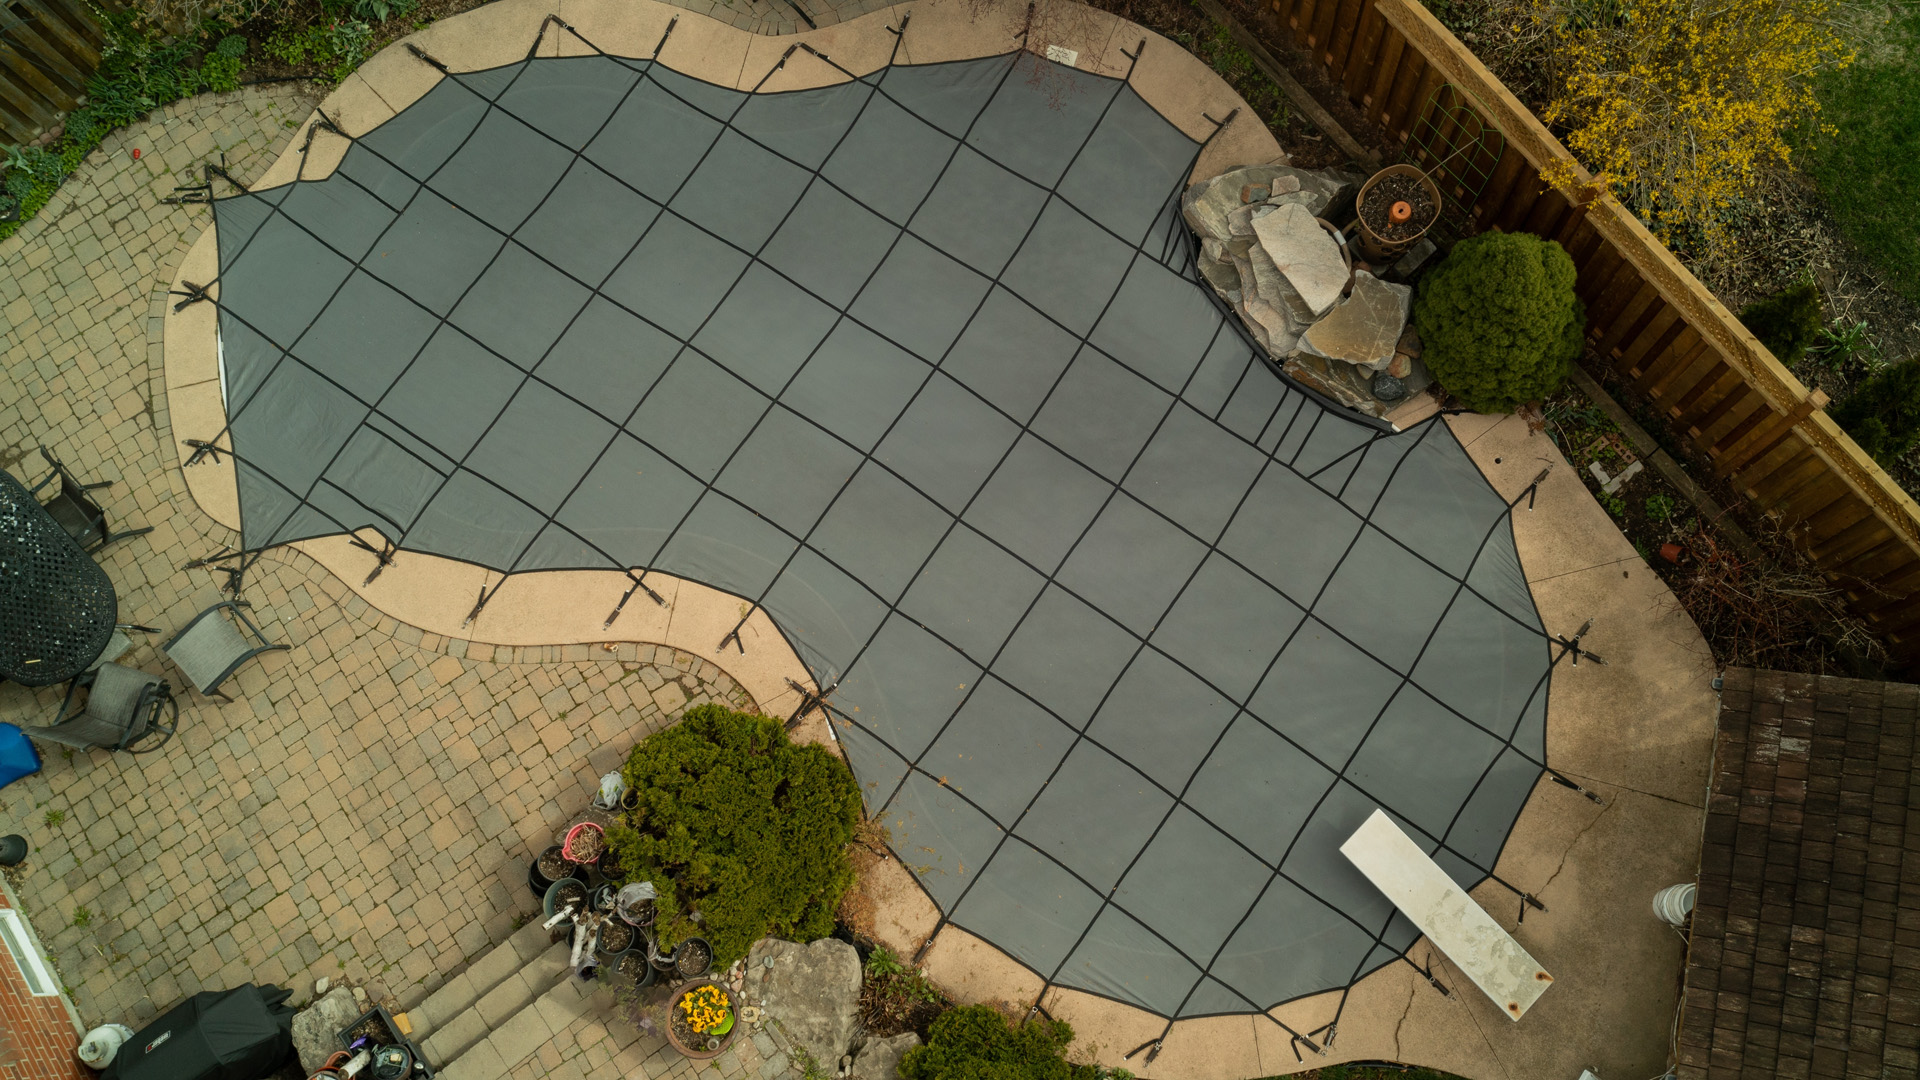 Loop Loc Safety Covers - Big Becks Pools and Pavers